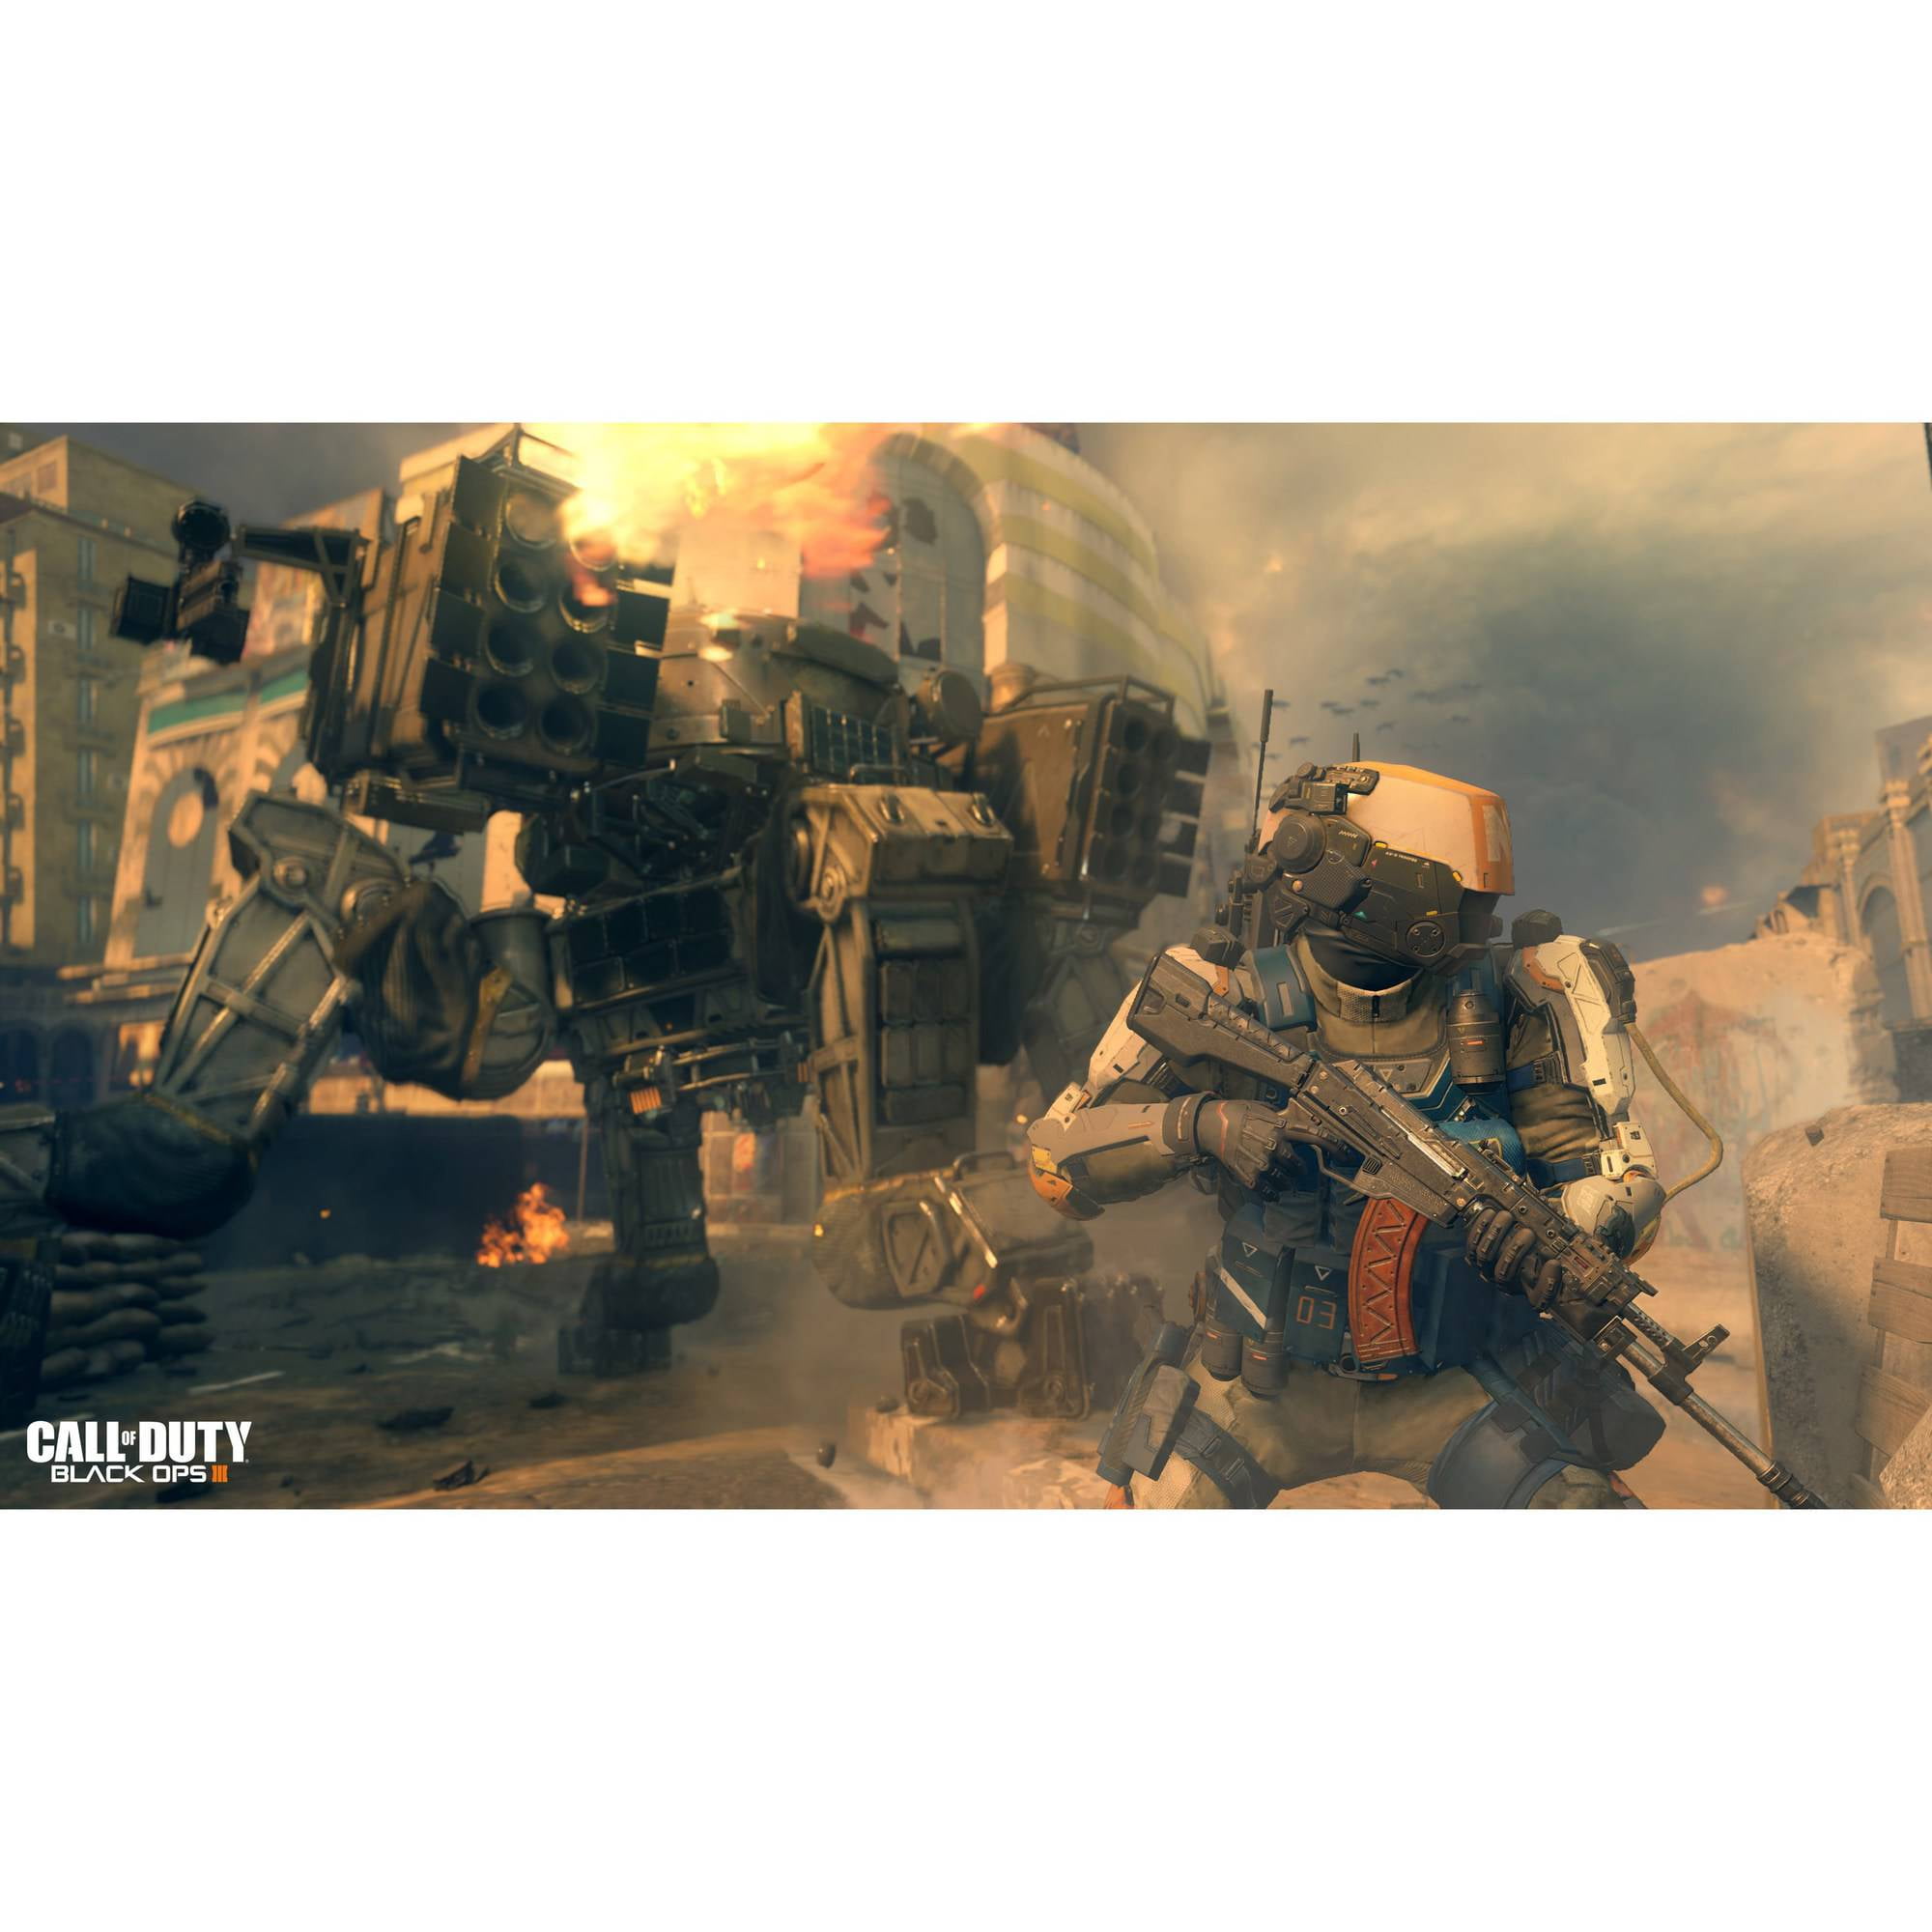 Pc Offline Call Of Duty Black Ops 3, Free Download Available, For Windows